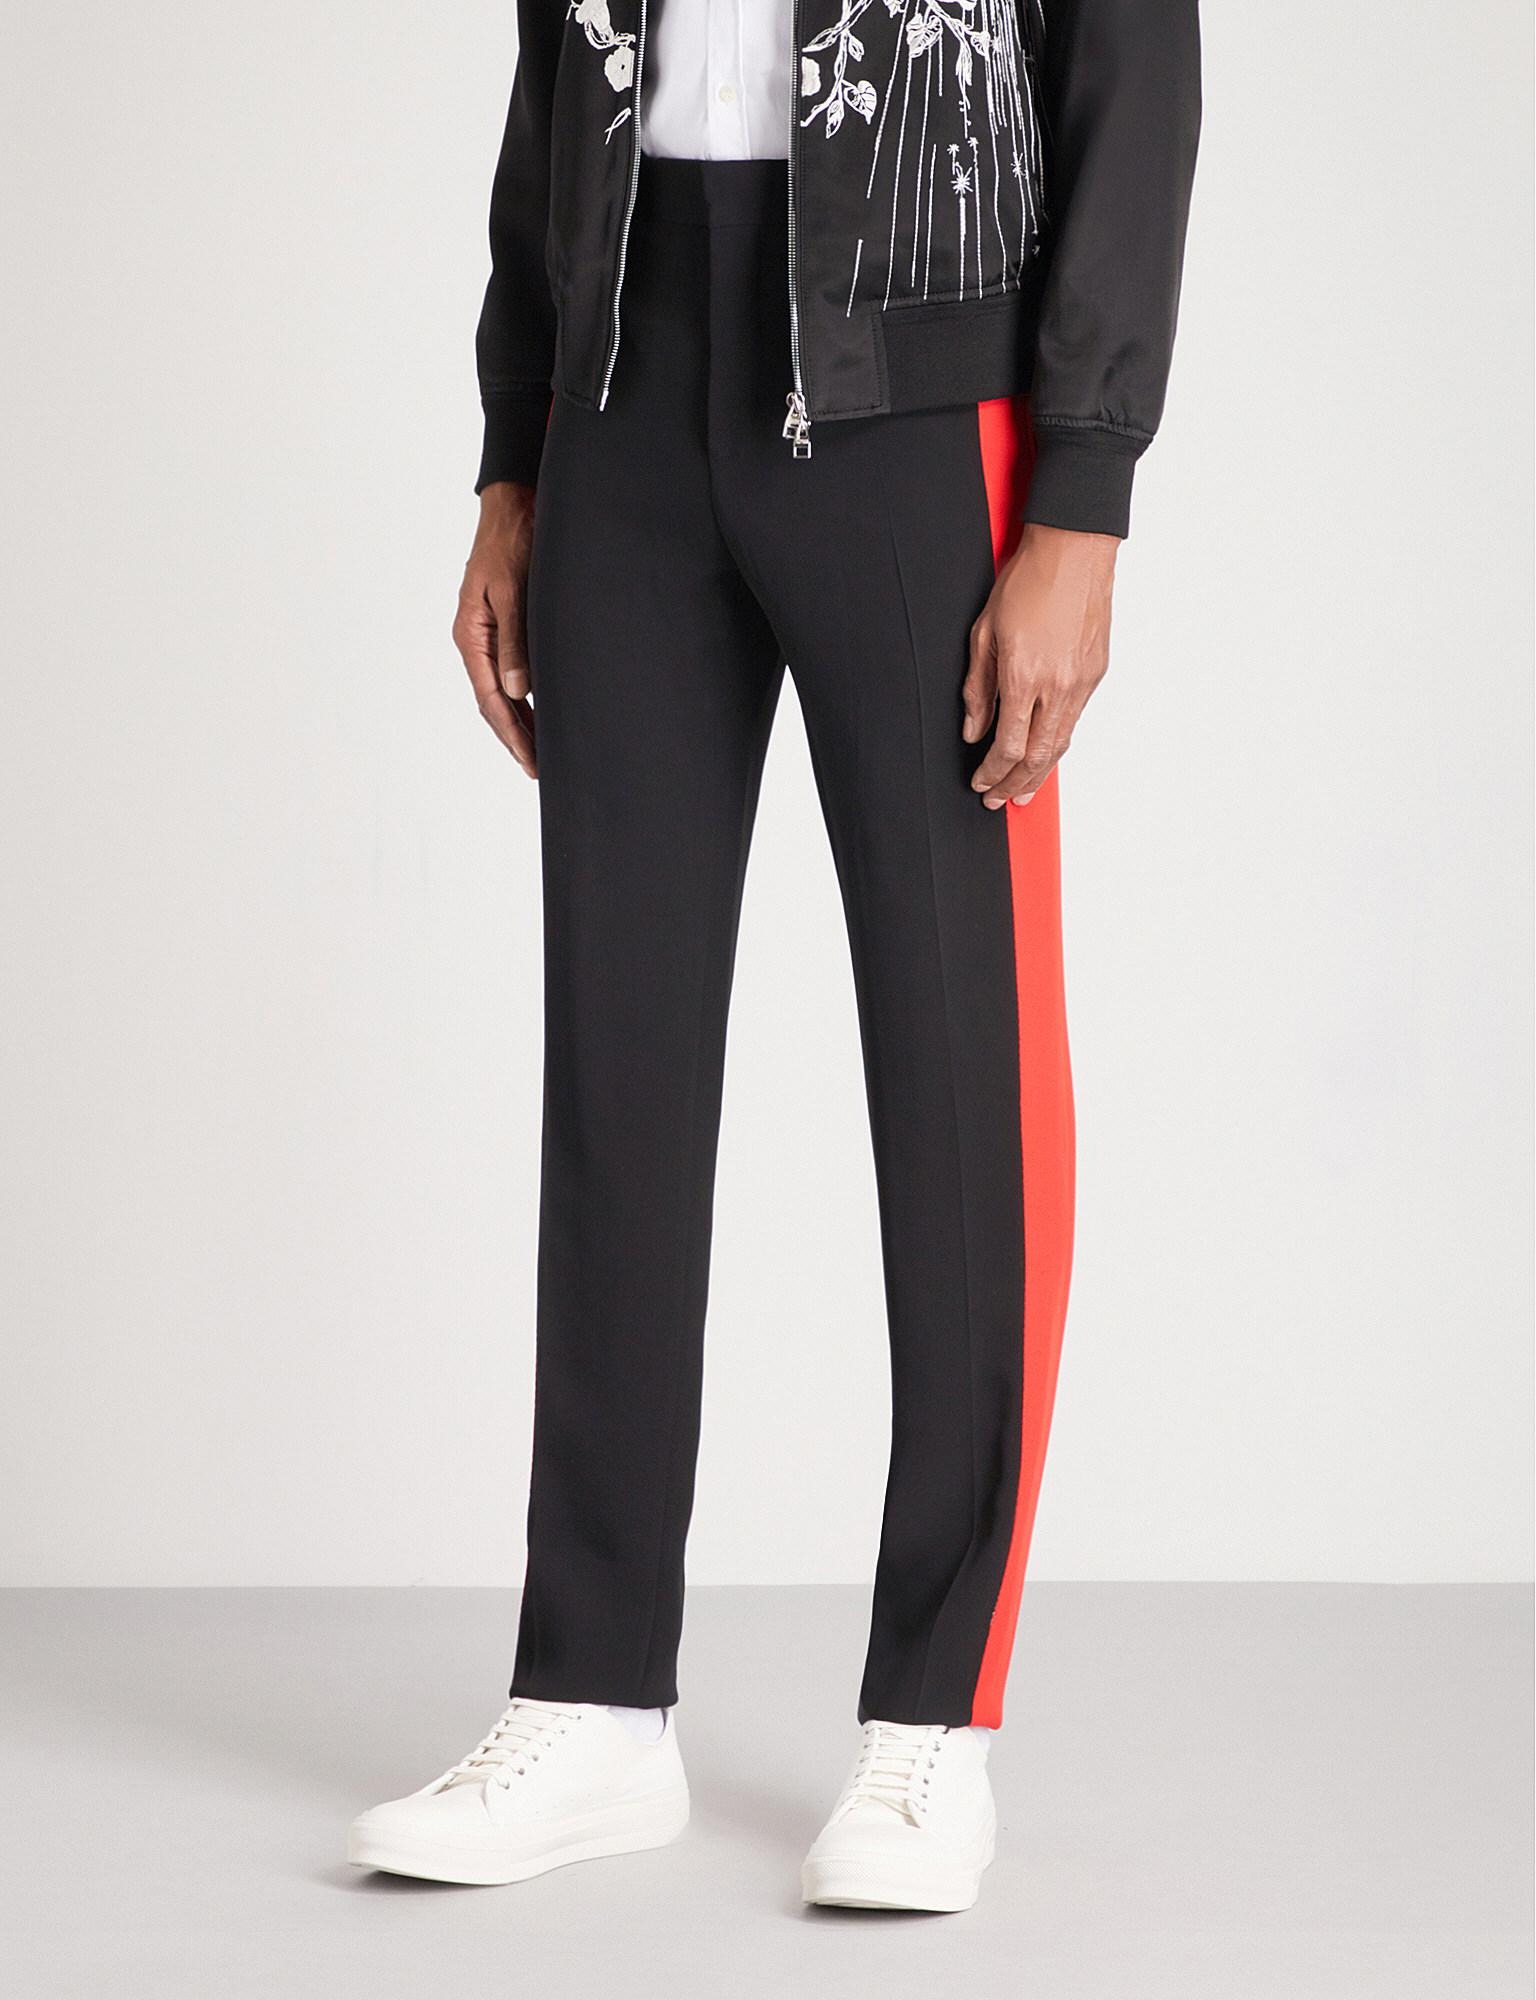 mens red and black striped trousers